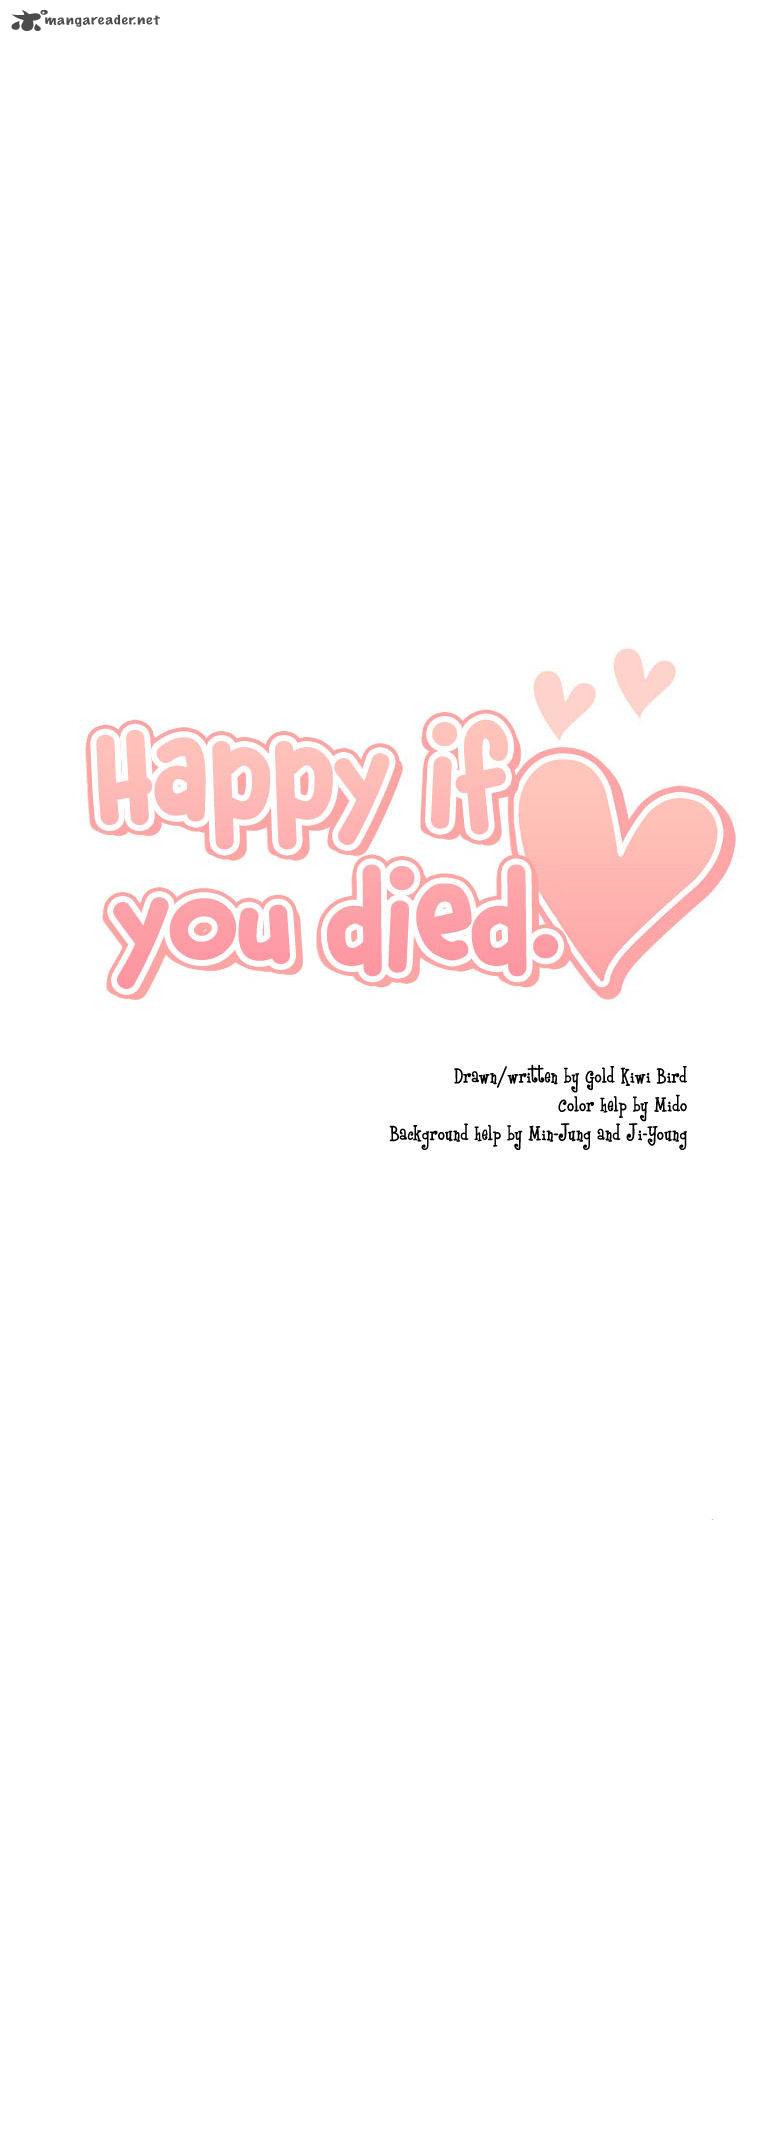 Happy If You Died 28 44